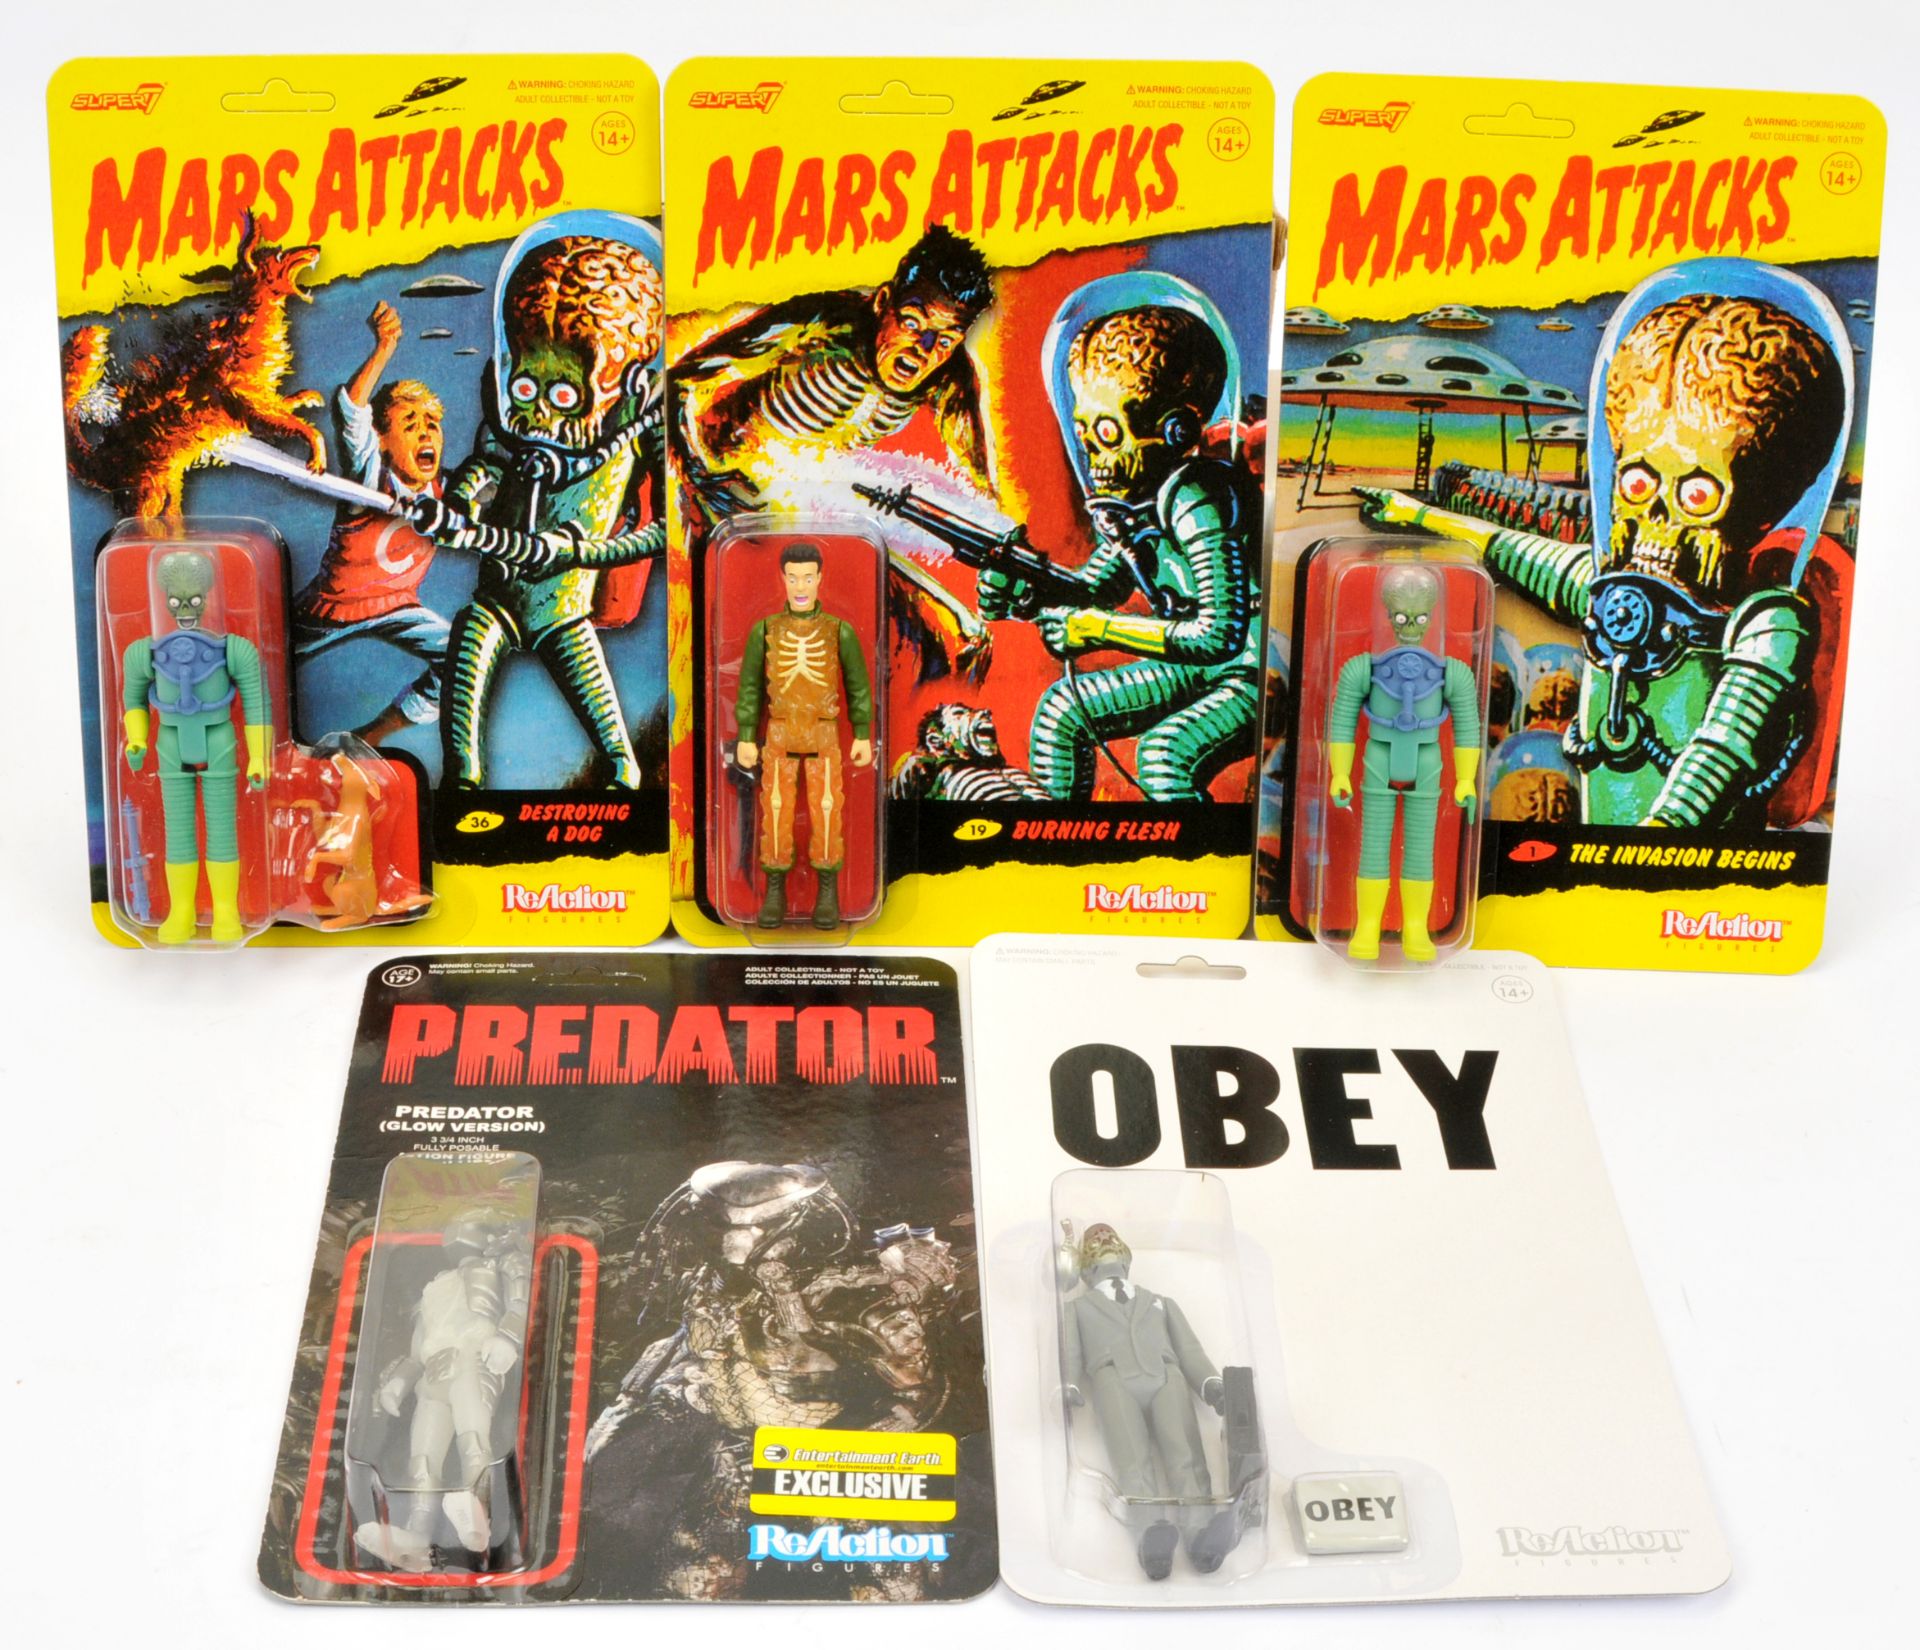 Super7 Reaction figures x 5 including Mars Attacks, Predator and They Live